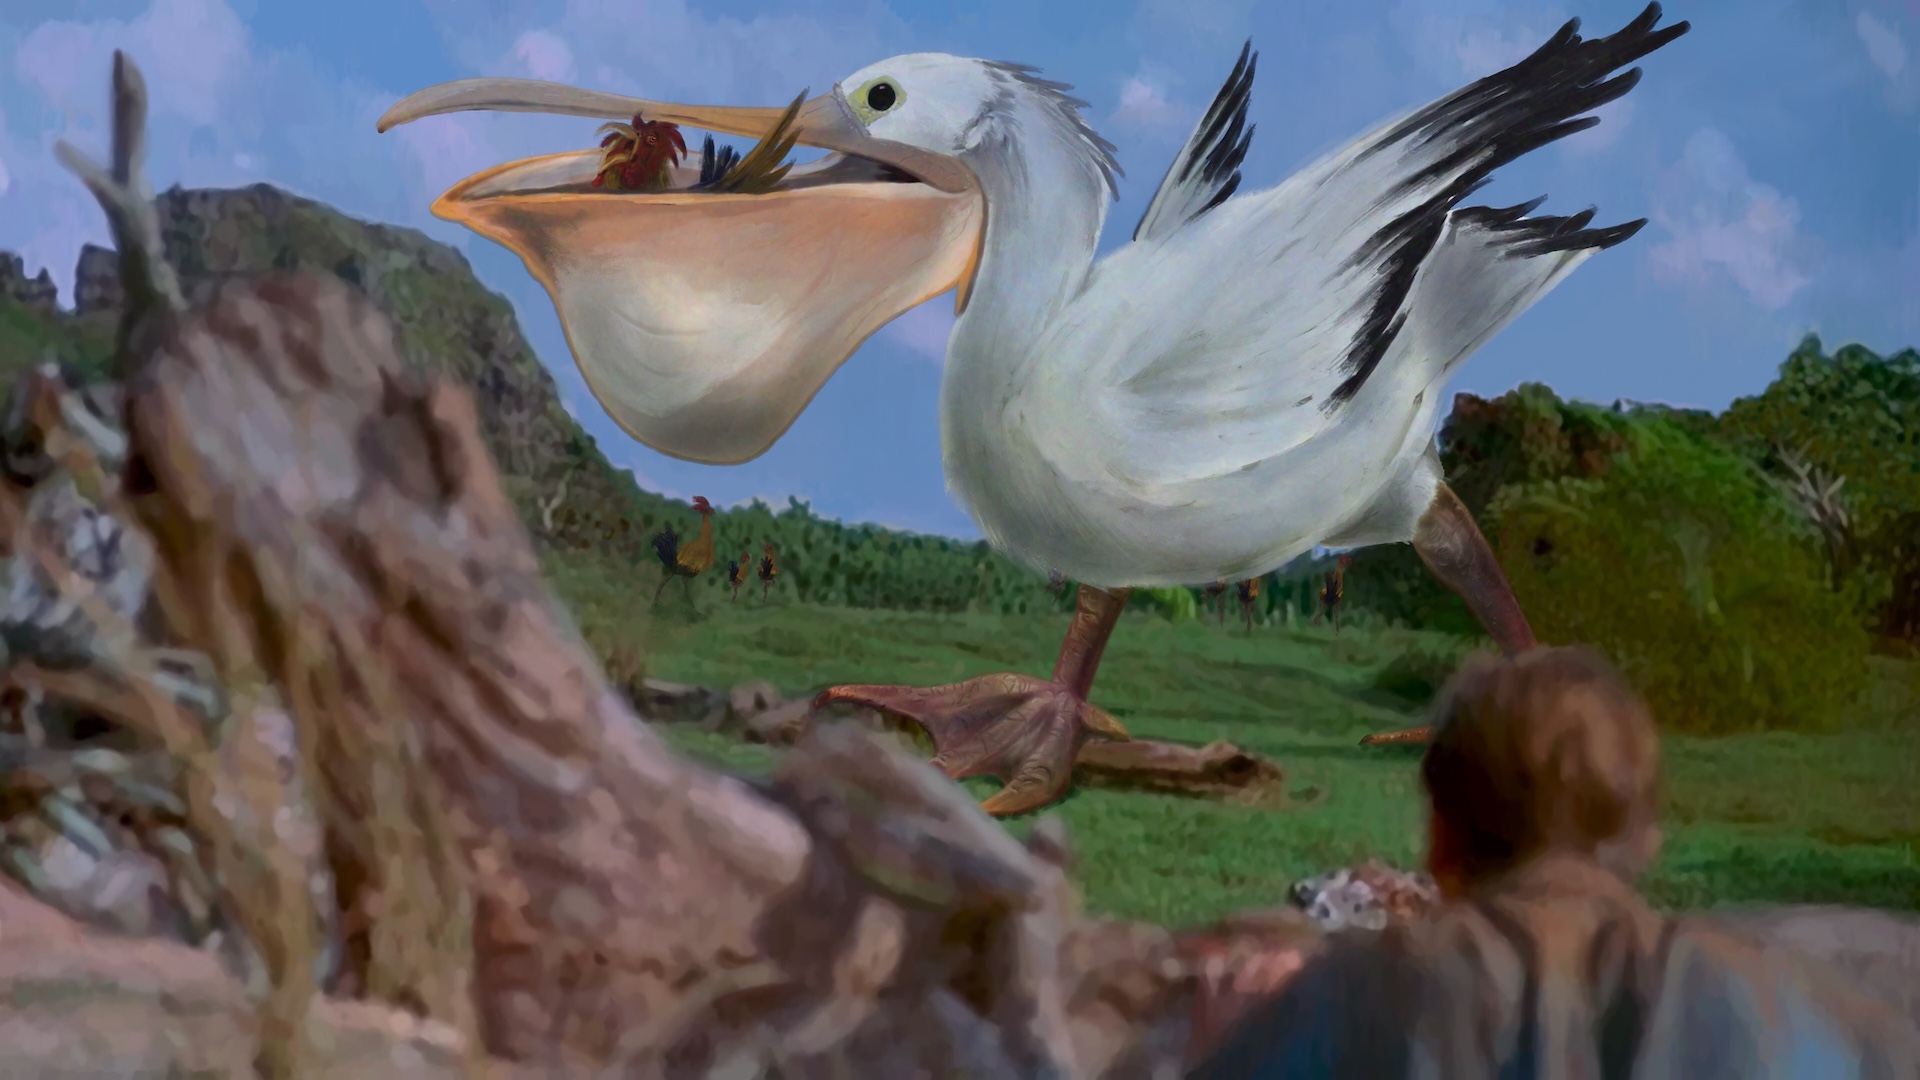 Digitally painted reproduction of of a frame from Jurassic Park, but instead of a T-rex eating a gallimimus, it's a giant pelican eating a rooster.'